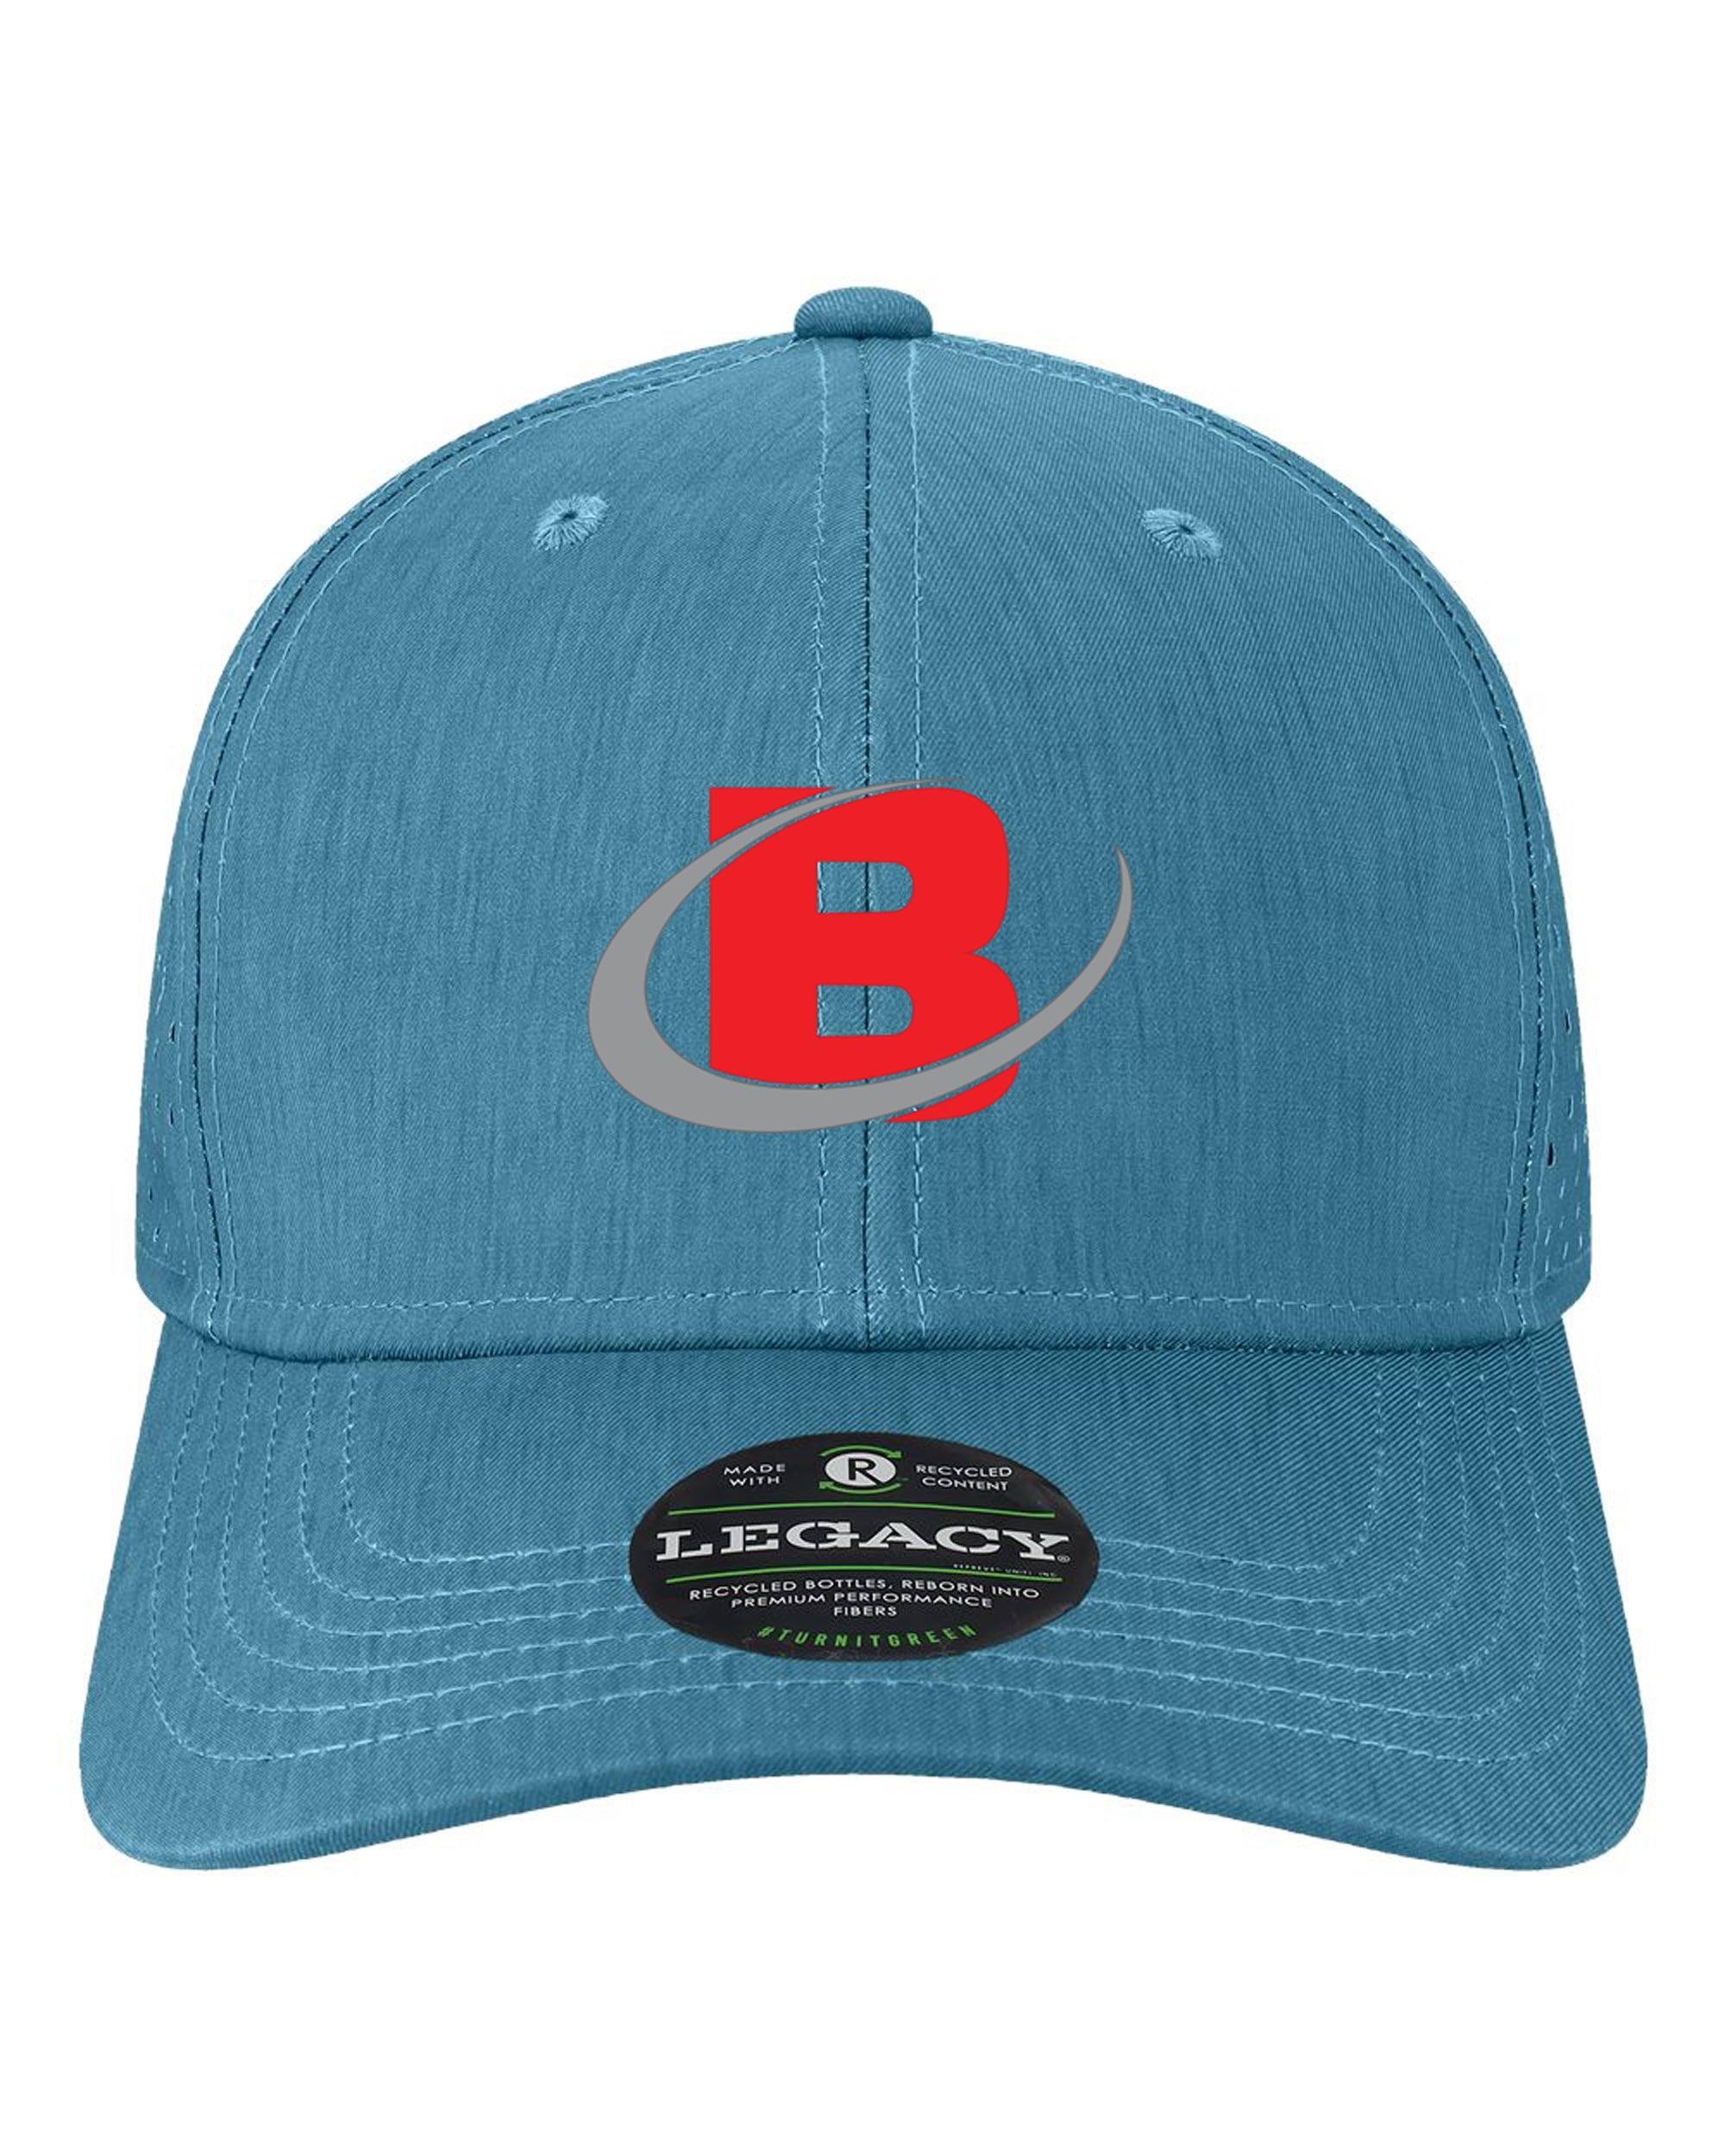 Bowman Excavating - Reclaimed Structured Hat